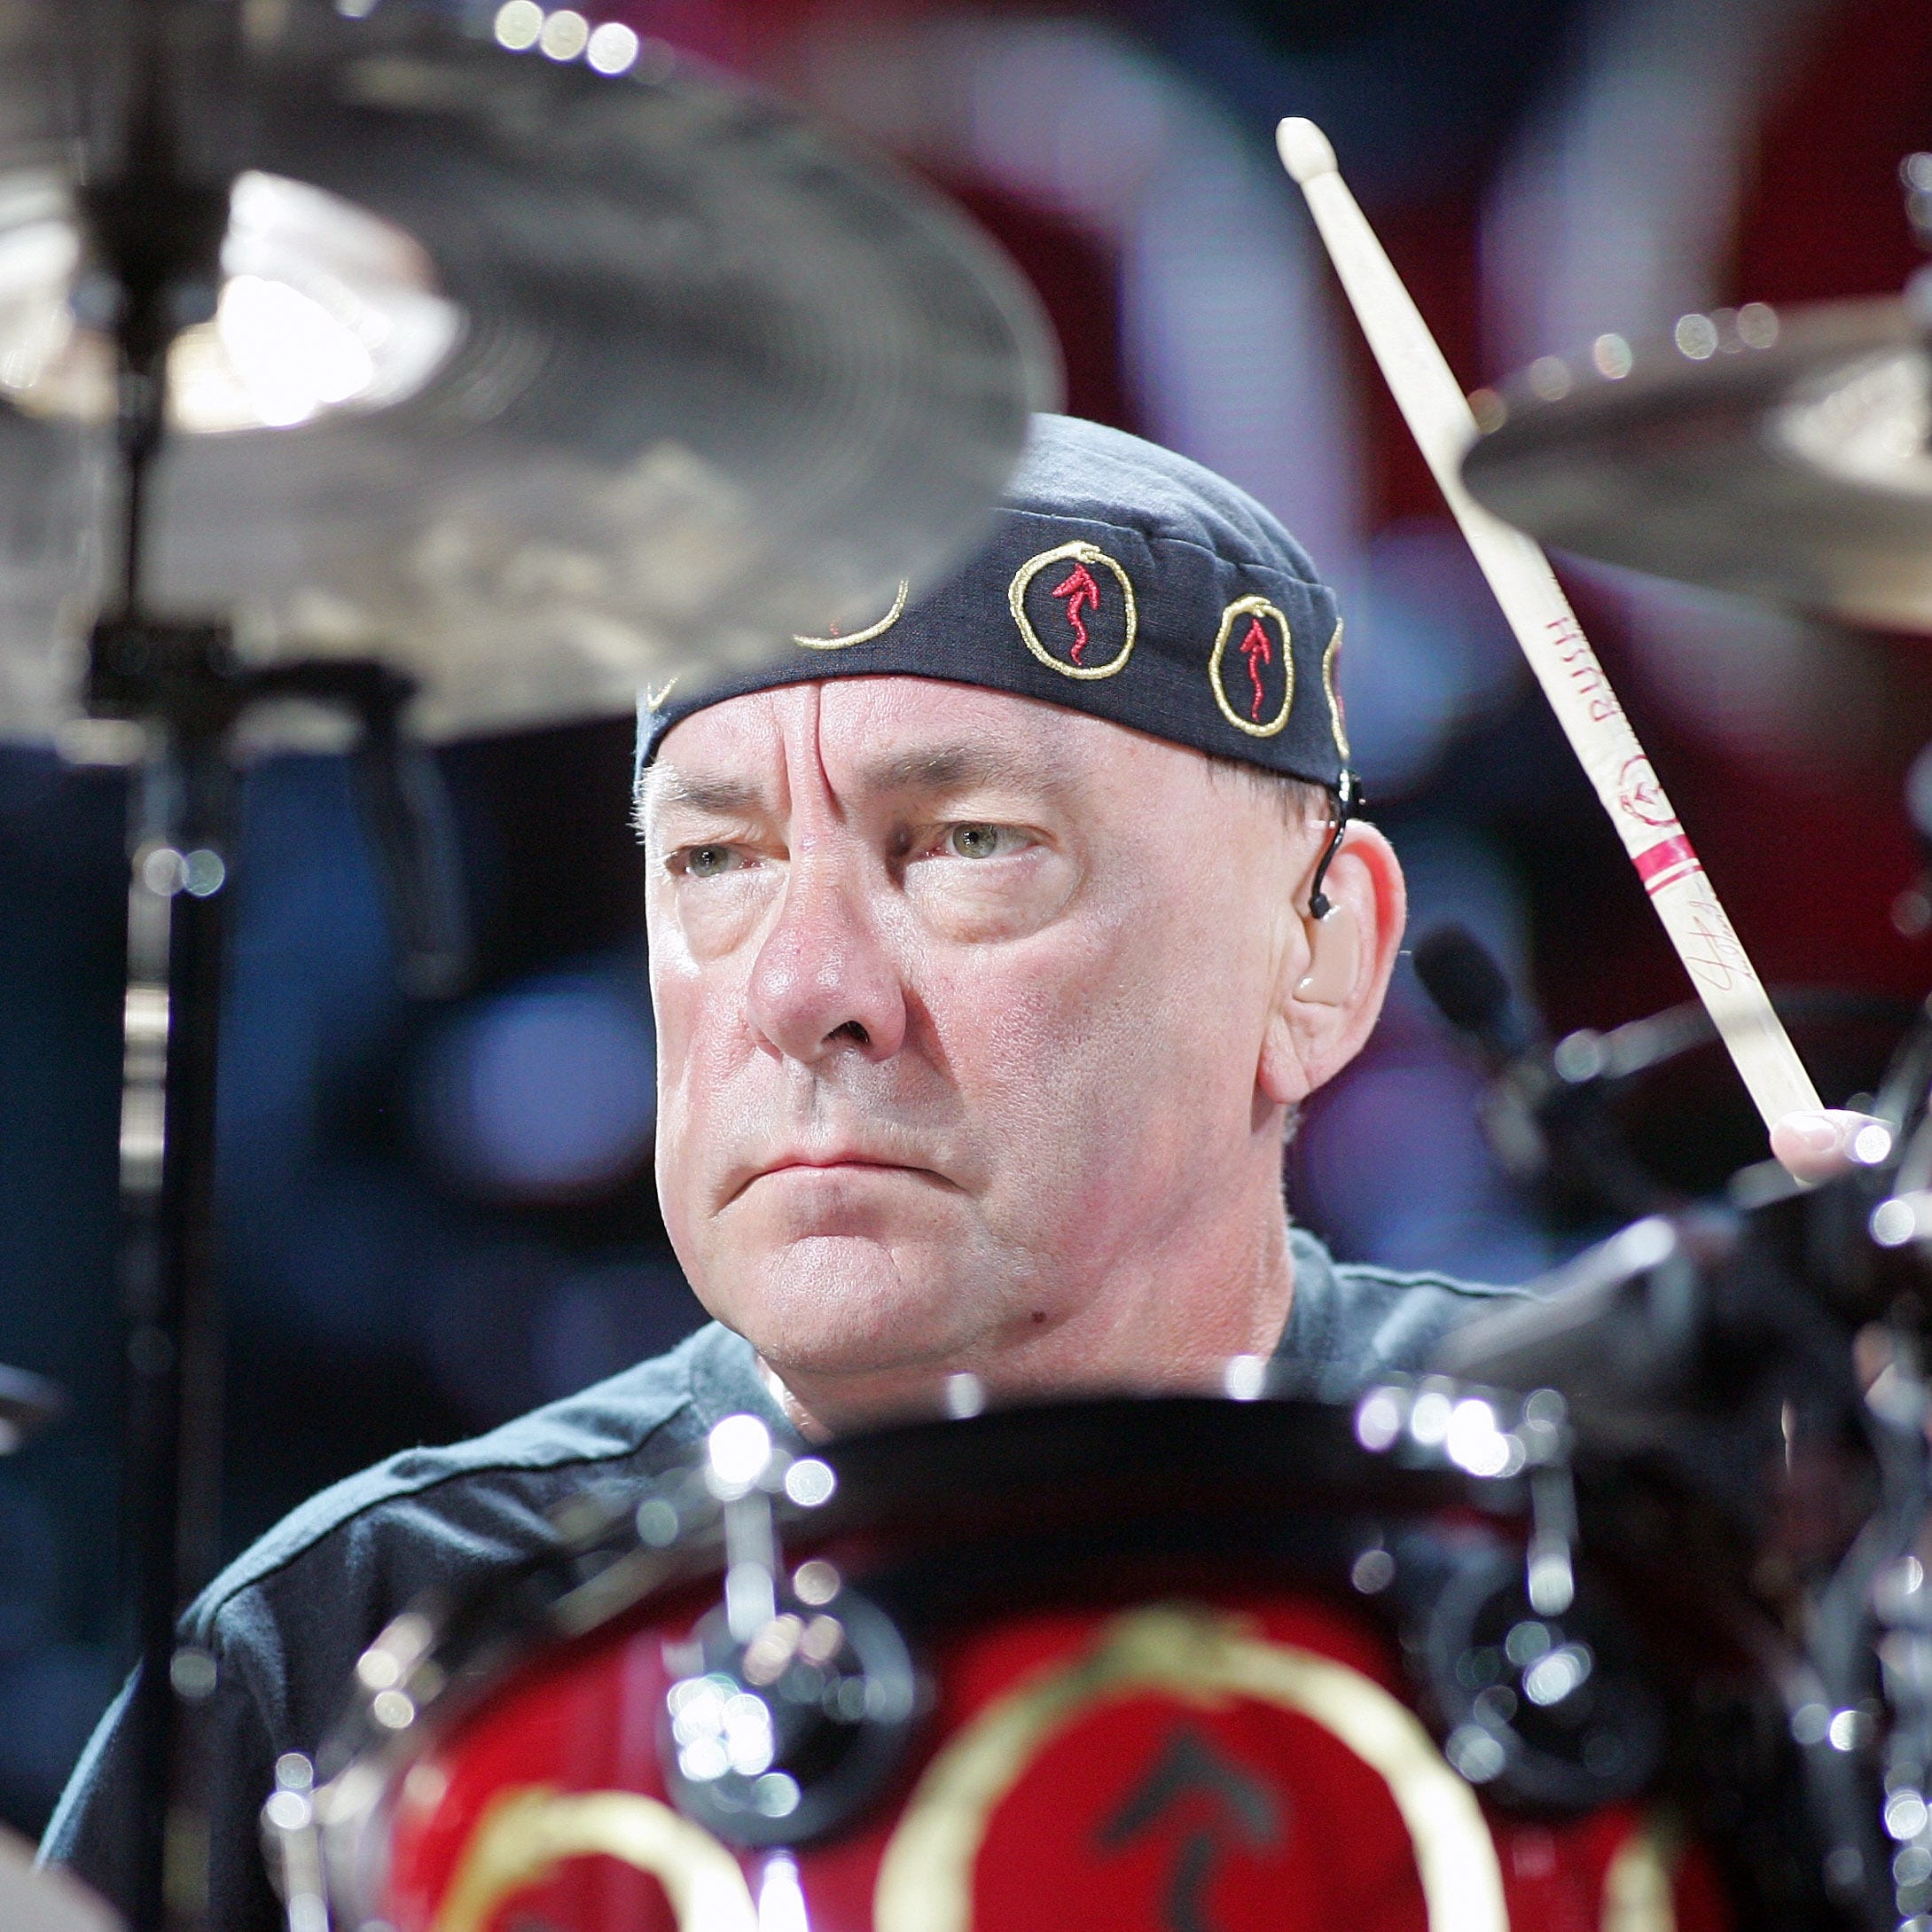 Neil Peart, the drummer and lyricist for Canadian progressive-rock titans Rush, died in Santa Monica, California on Jan. 7 at age 67 following a battle with brain cancer. “It is with broken hearts and the deepest sadness that we must share the terrible news that...our friend, soul brother and band mate of over 45 years, Neil, has lost his… battle with brain cancer (Glioblastoma),” Rush tweeted. Peart, along with bandmates Geddy Lee and Alex Lifeson, was inducted into the Rock and Roll Hall of Fame in 2013.